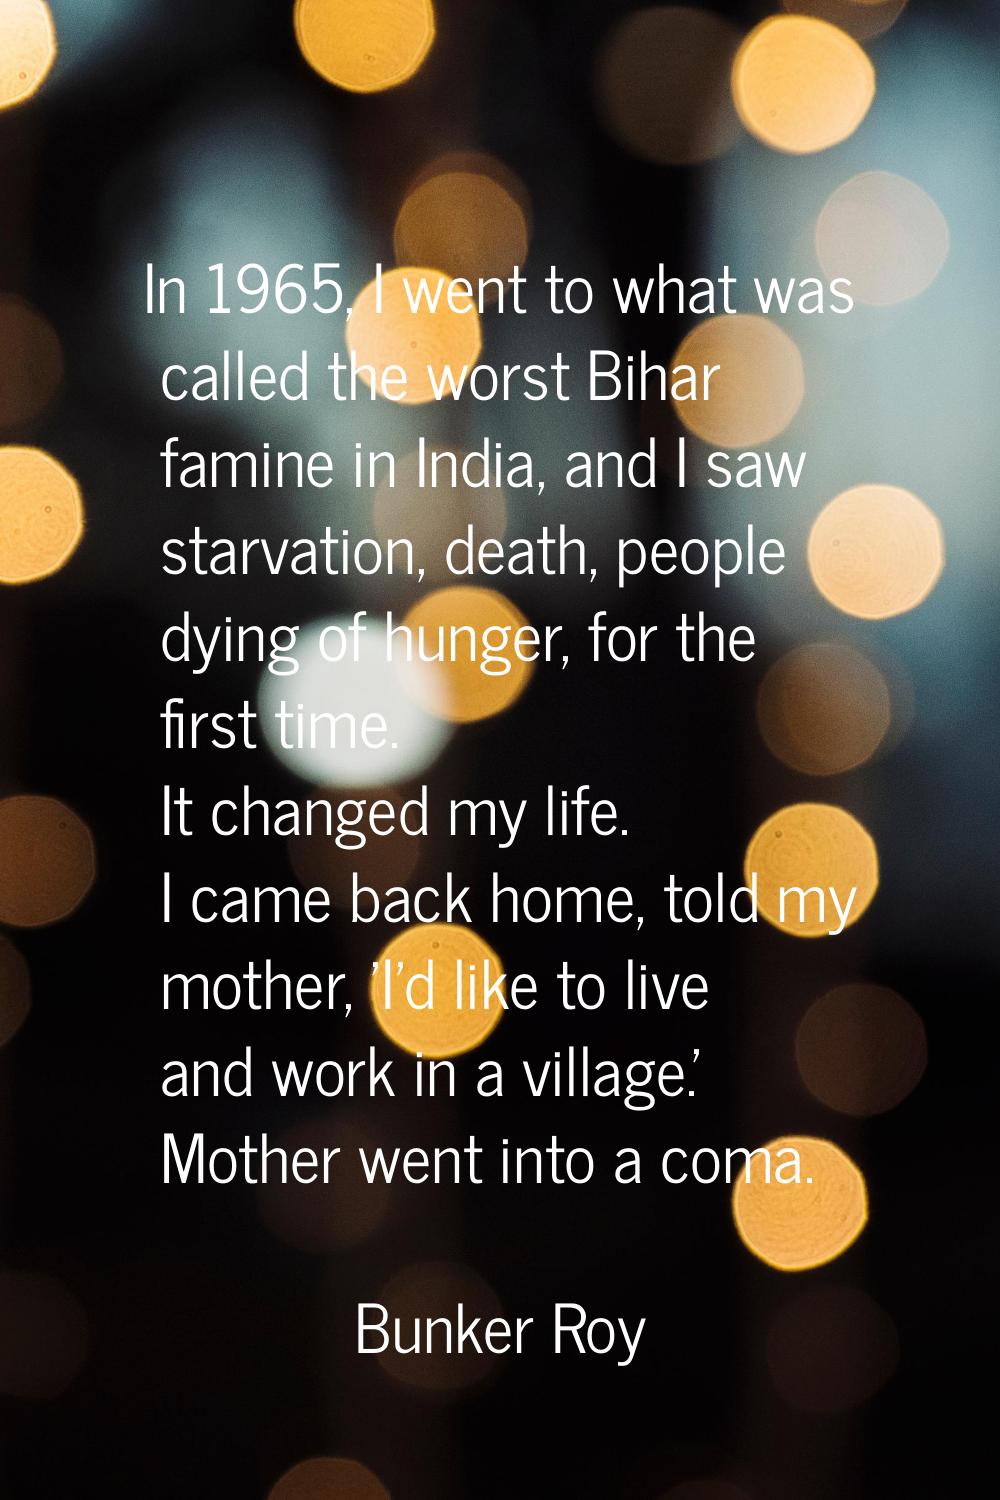 In 1965, I went to what was called the worst Bihar famine in India, and I saw starvation, death, pe